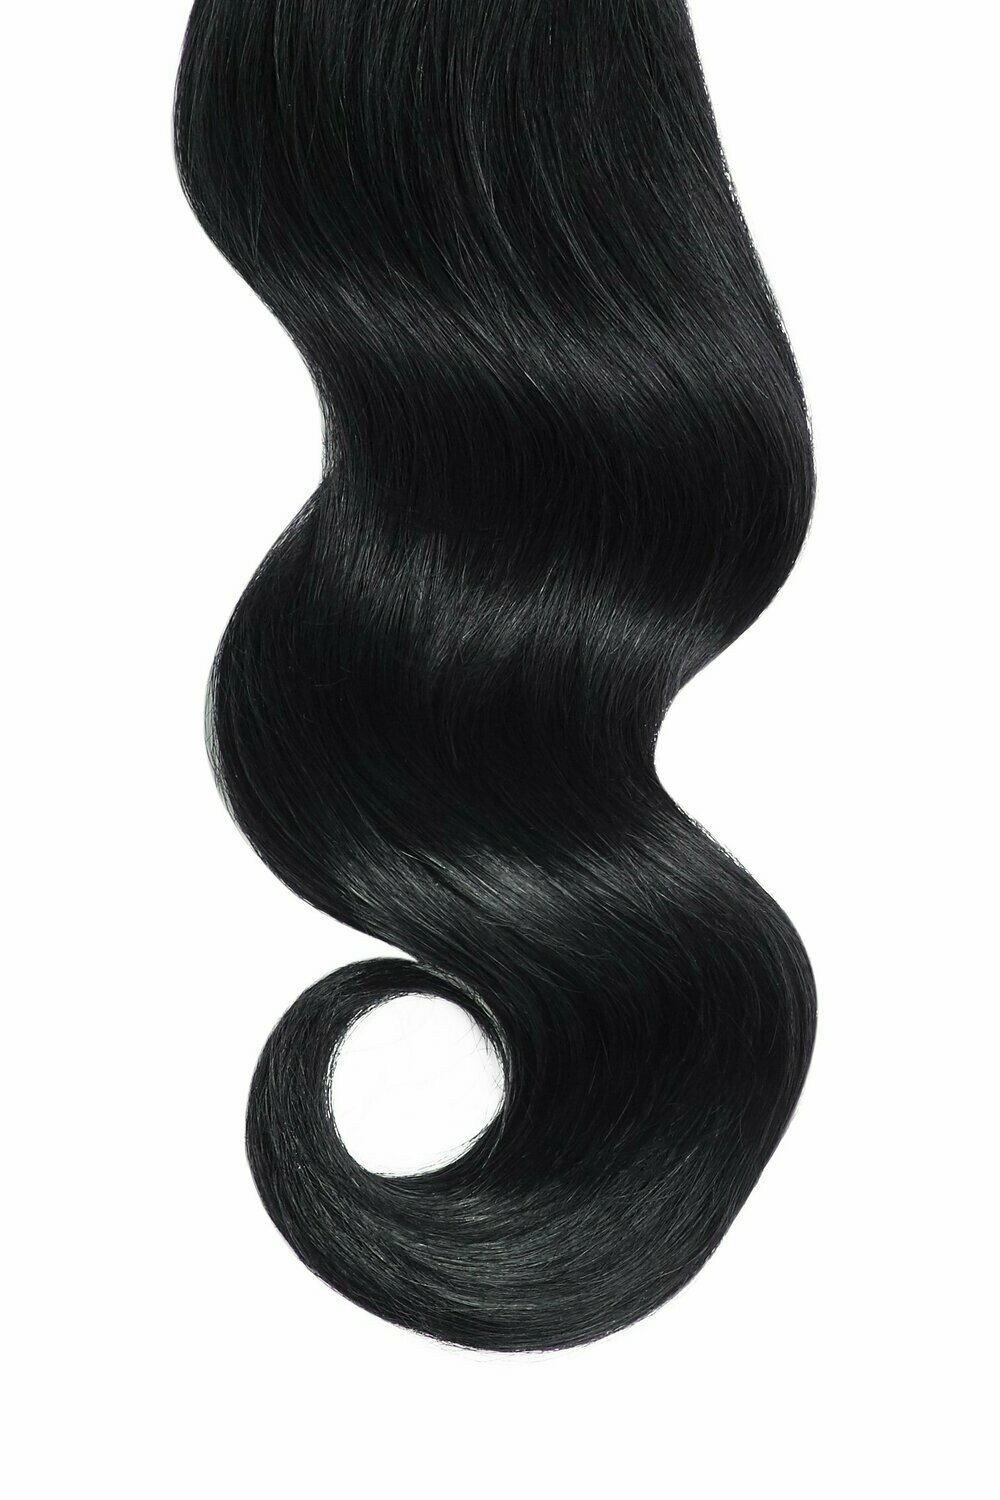 22" MicroLink I-Tip Hair Extensions #1